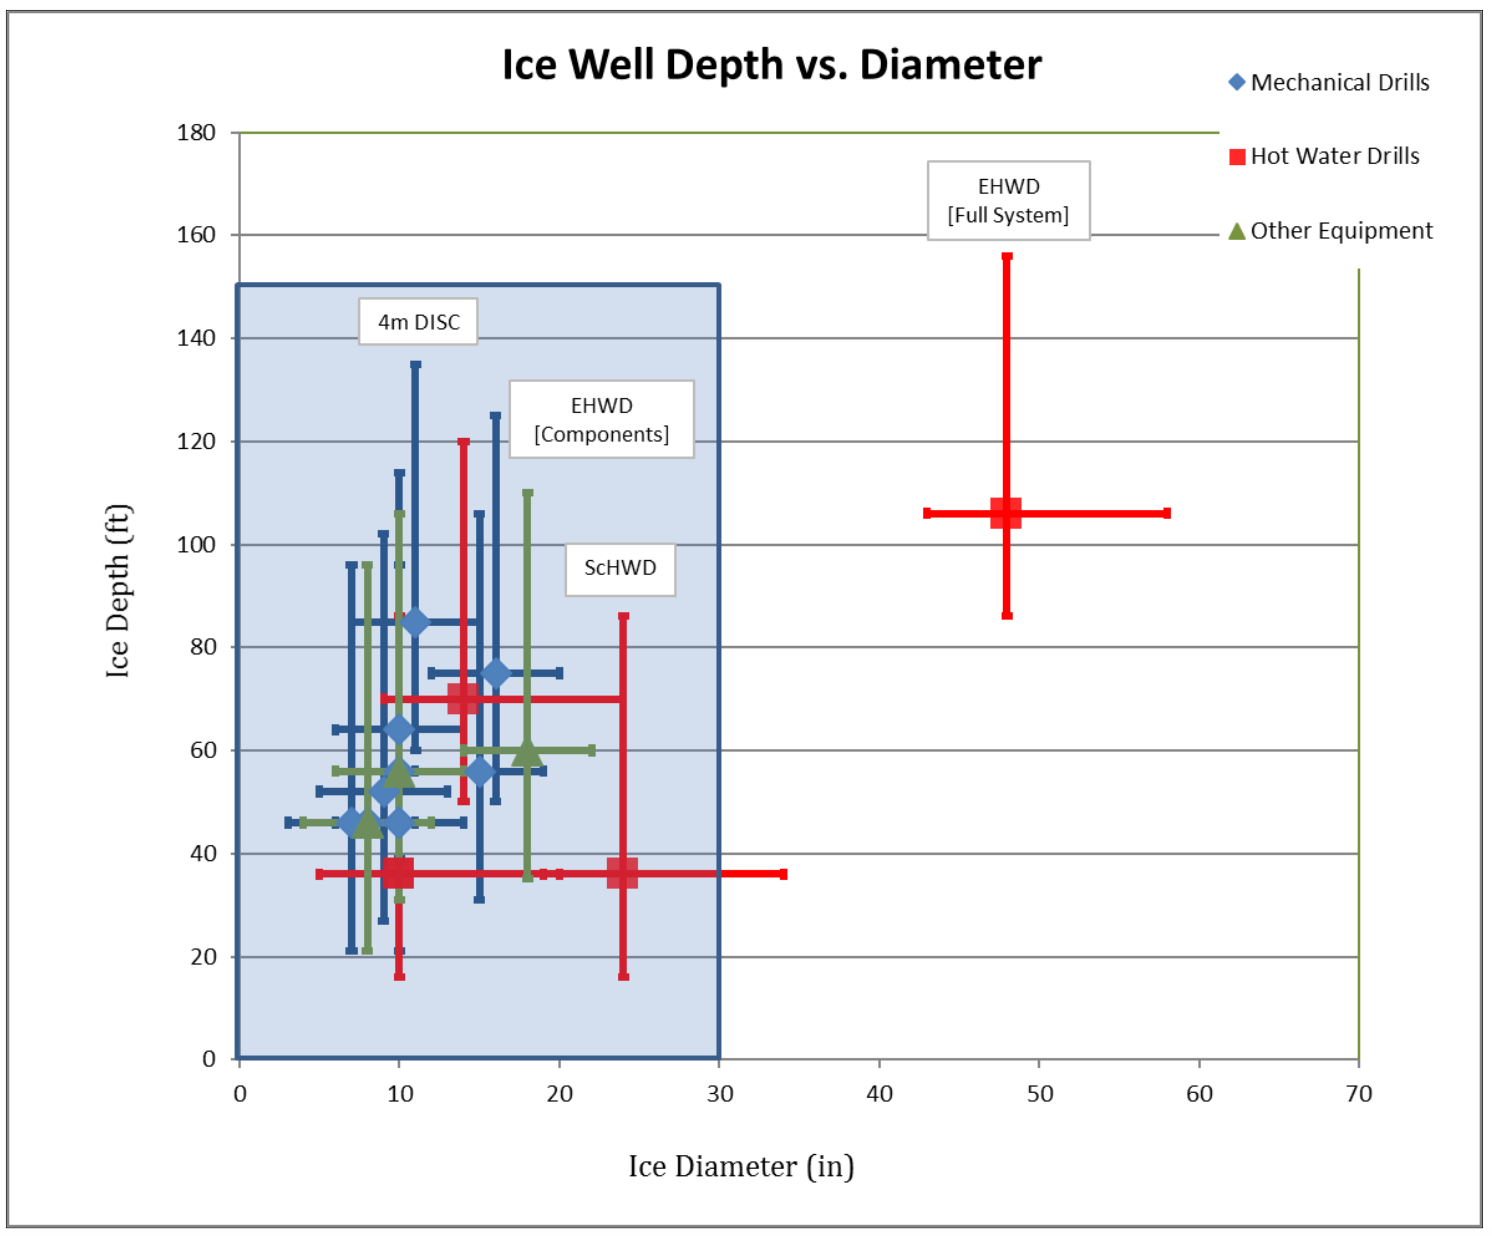 Diameter and depth requirements for various ice drilling systems